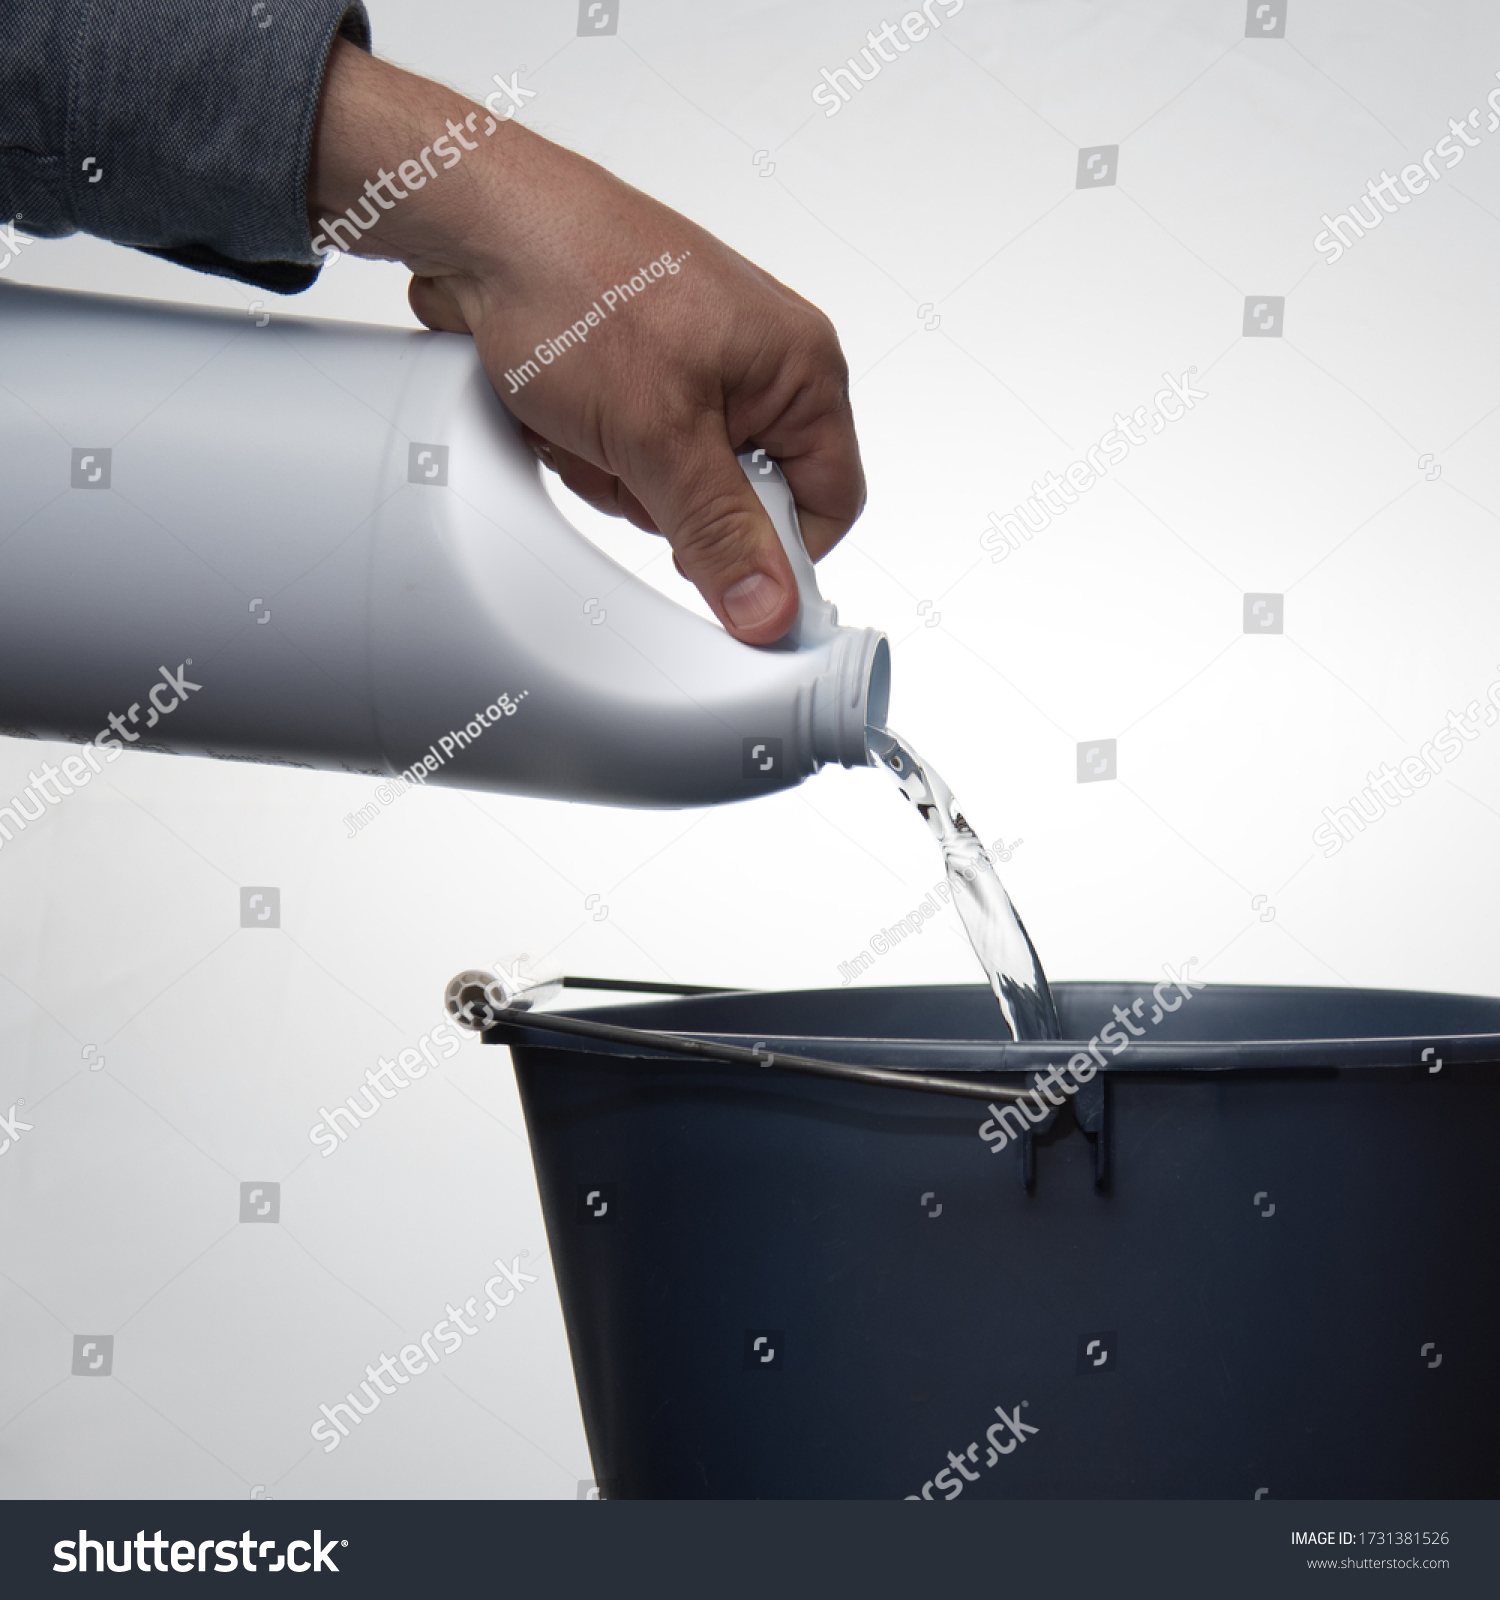 A man's hand pouring cleaner or bleach into a blue bucket against a white background. #1731381526